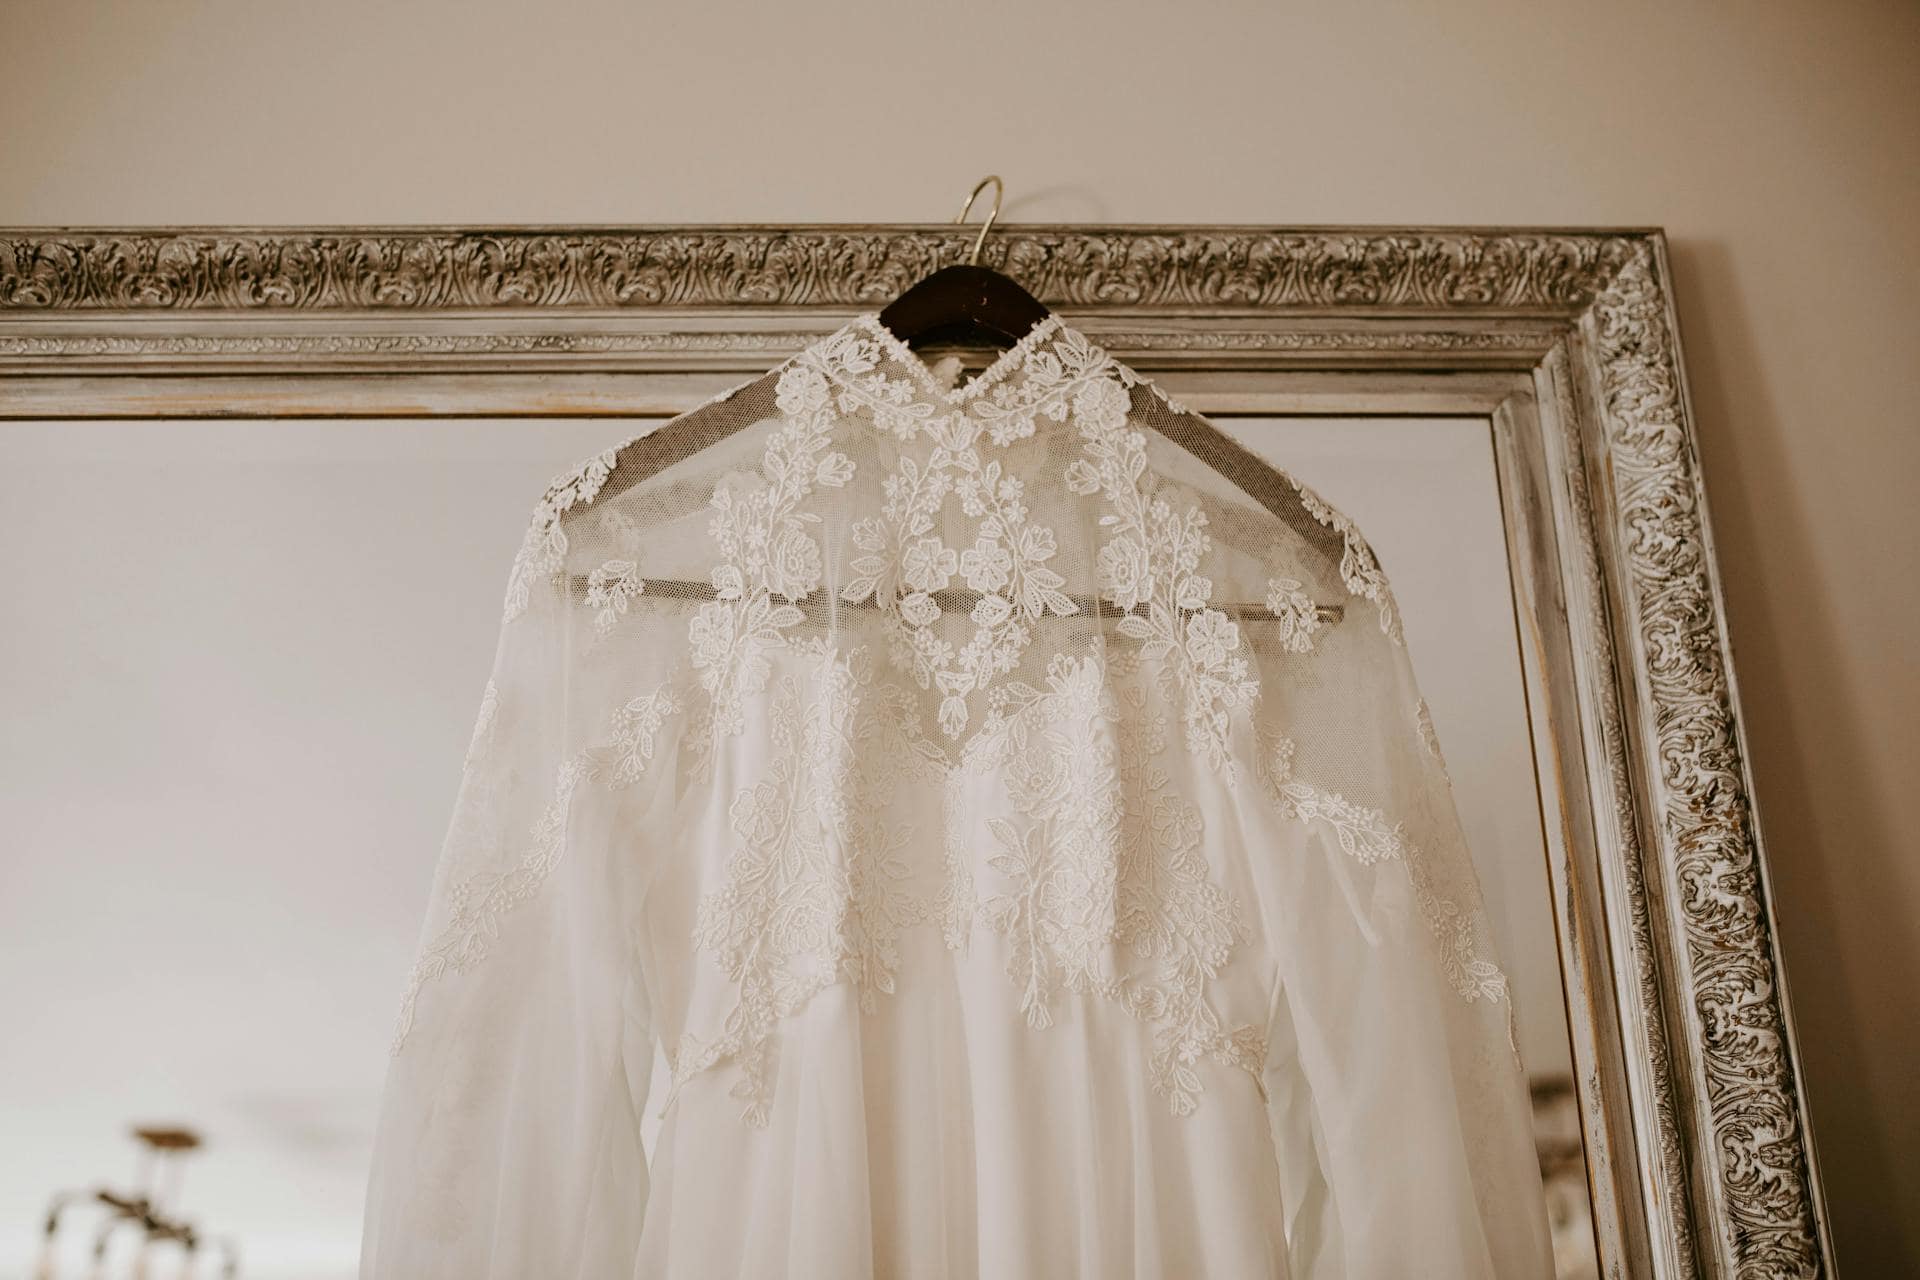 <p>Instead of buying expensive wedding attire or decor, consider renting items or borrowing from friends or family members to save money. Wedding attire rental services offer a wide range of options for brides, grooms, and wedding party members, including dresses, suits, and accessories, at a fraction of the cost of purchasing new. Similarly, borrowing decor items such as centerpieces, linens, and tableware from friends or family members, who have recently gotten married, can help you save money on decorations and create a cohesive look for your wedding.</p>